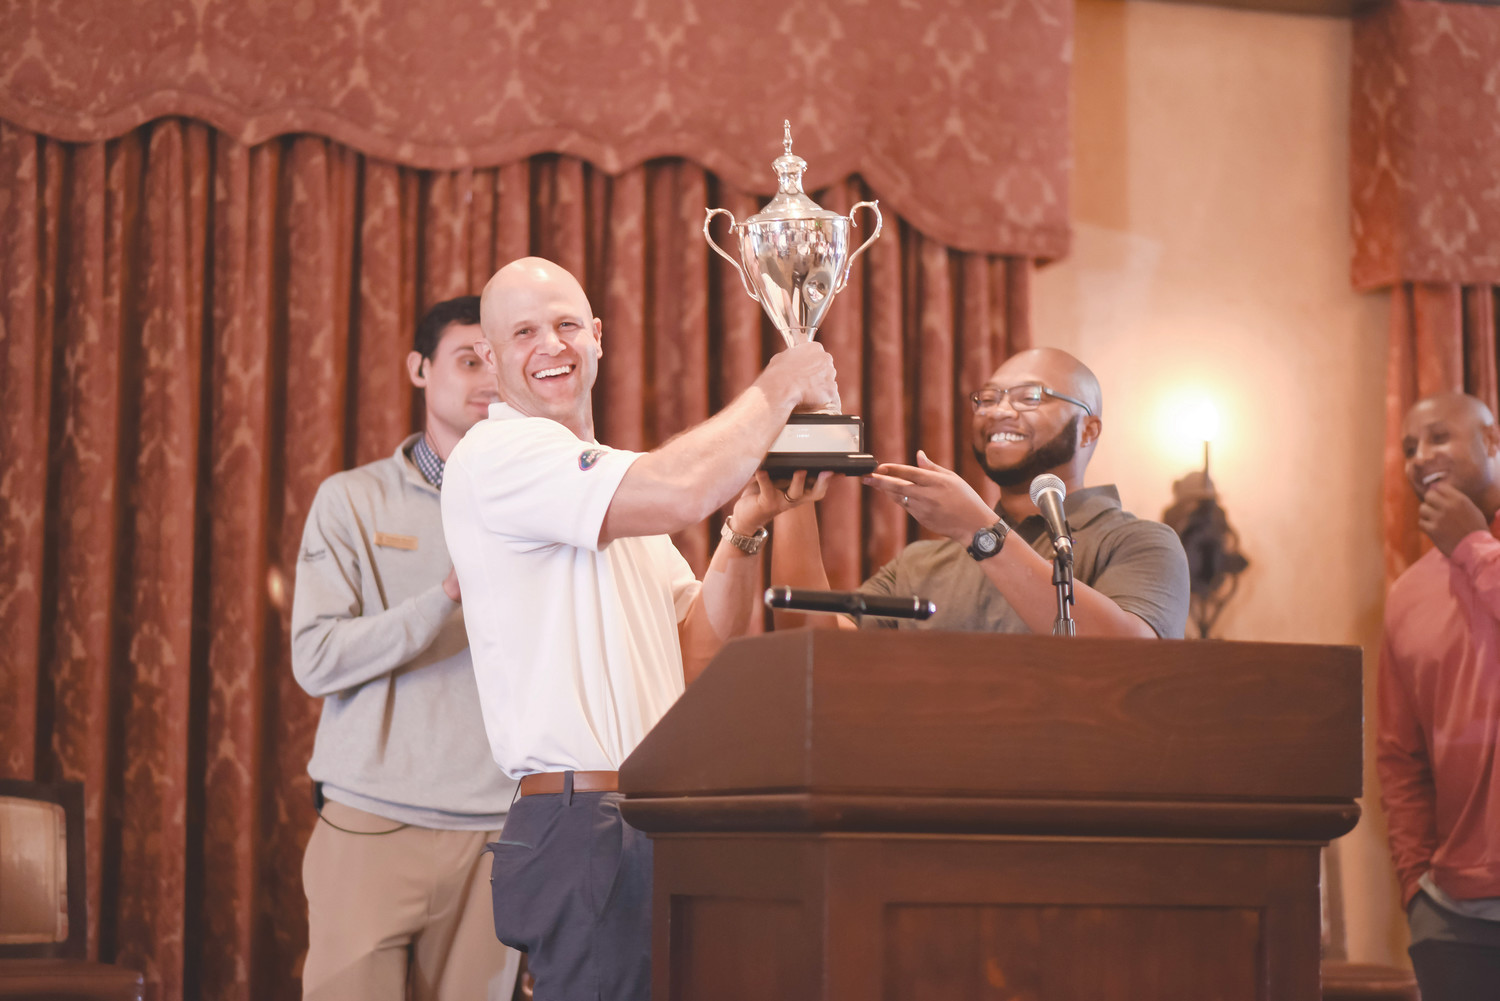 Danny Wuerffel and Demetrius Summerville, executive director of Kaley Square in Orlando (Desire Street Ministry partner), award the Desire Cup to the Florida Gators golfers, who won the tournament 32-30.